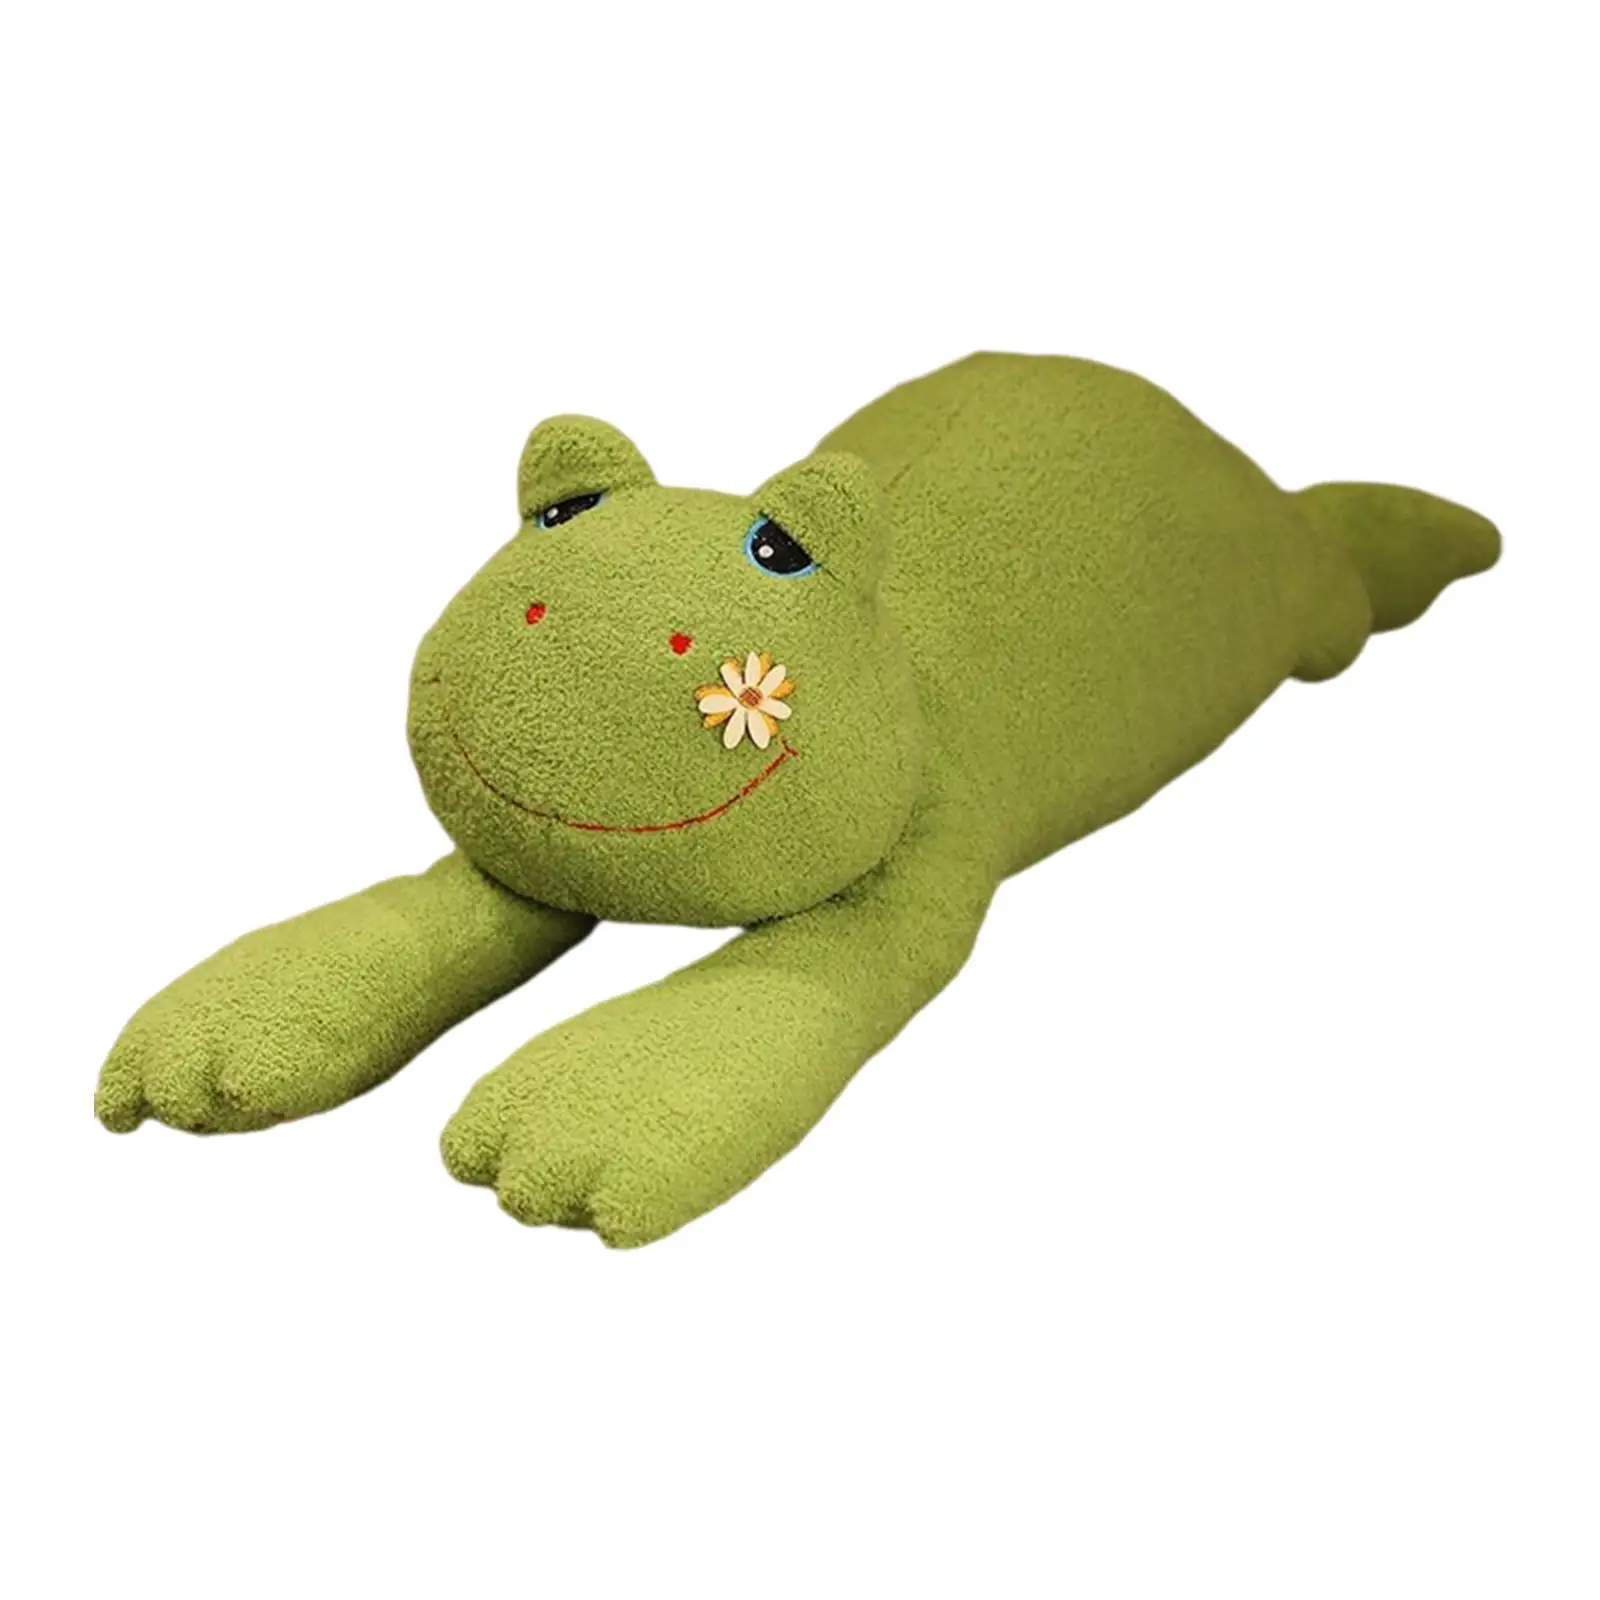 Adorable Frog Plush Toy Cushion Stuffed Animal for Theme Party Holiday Kids